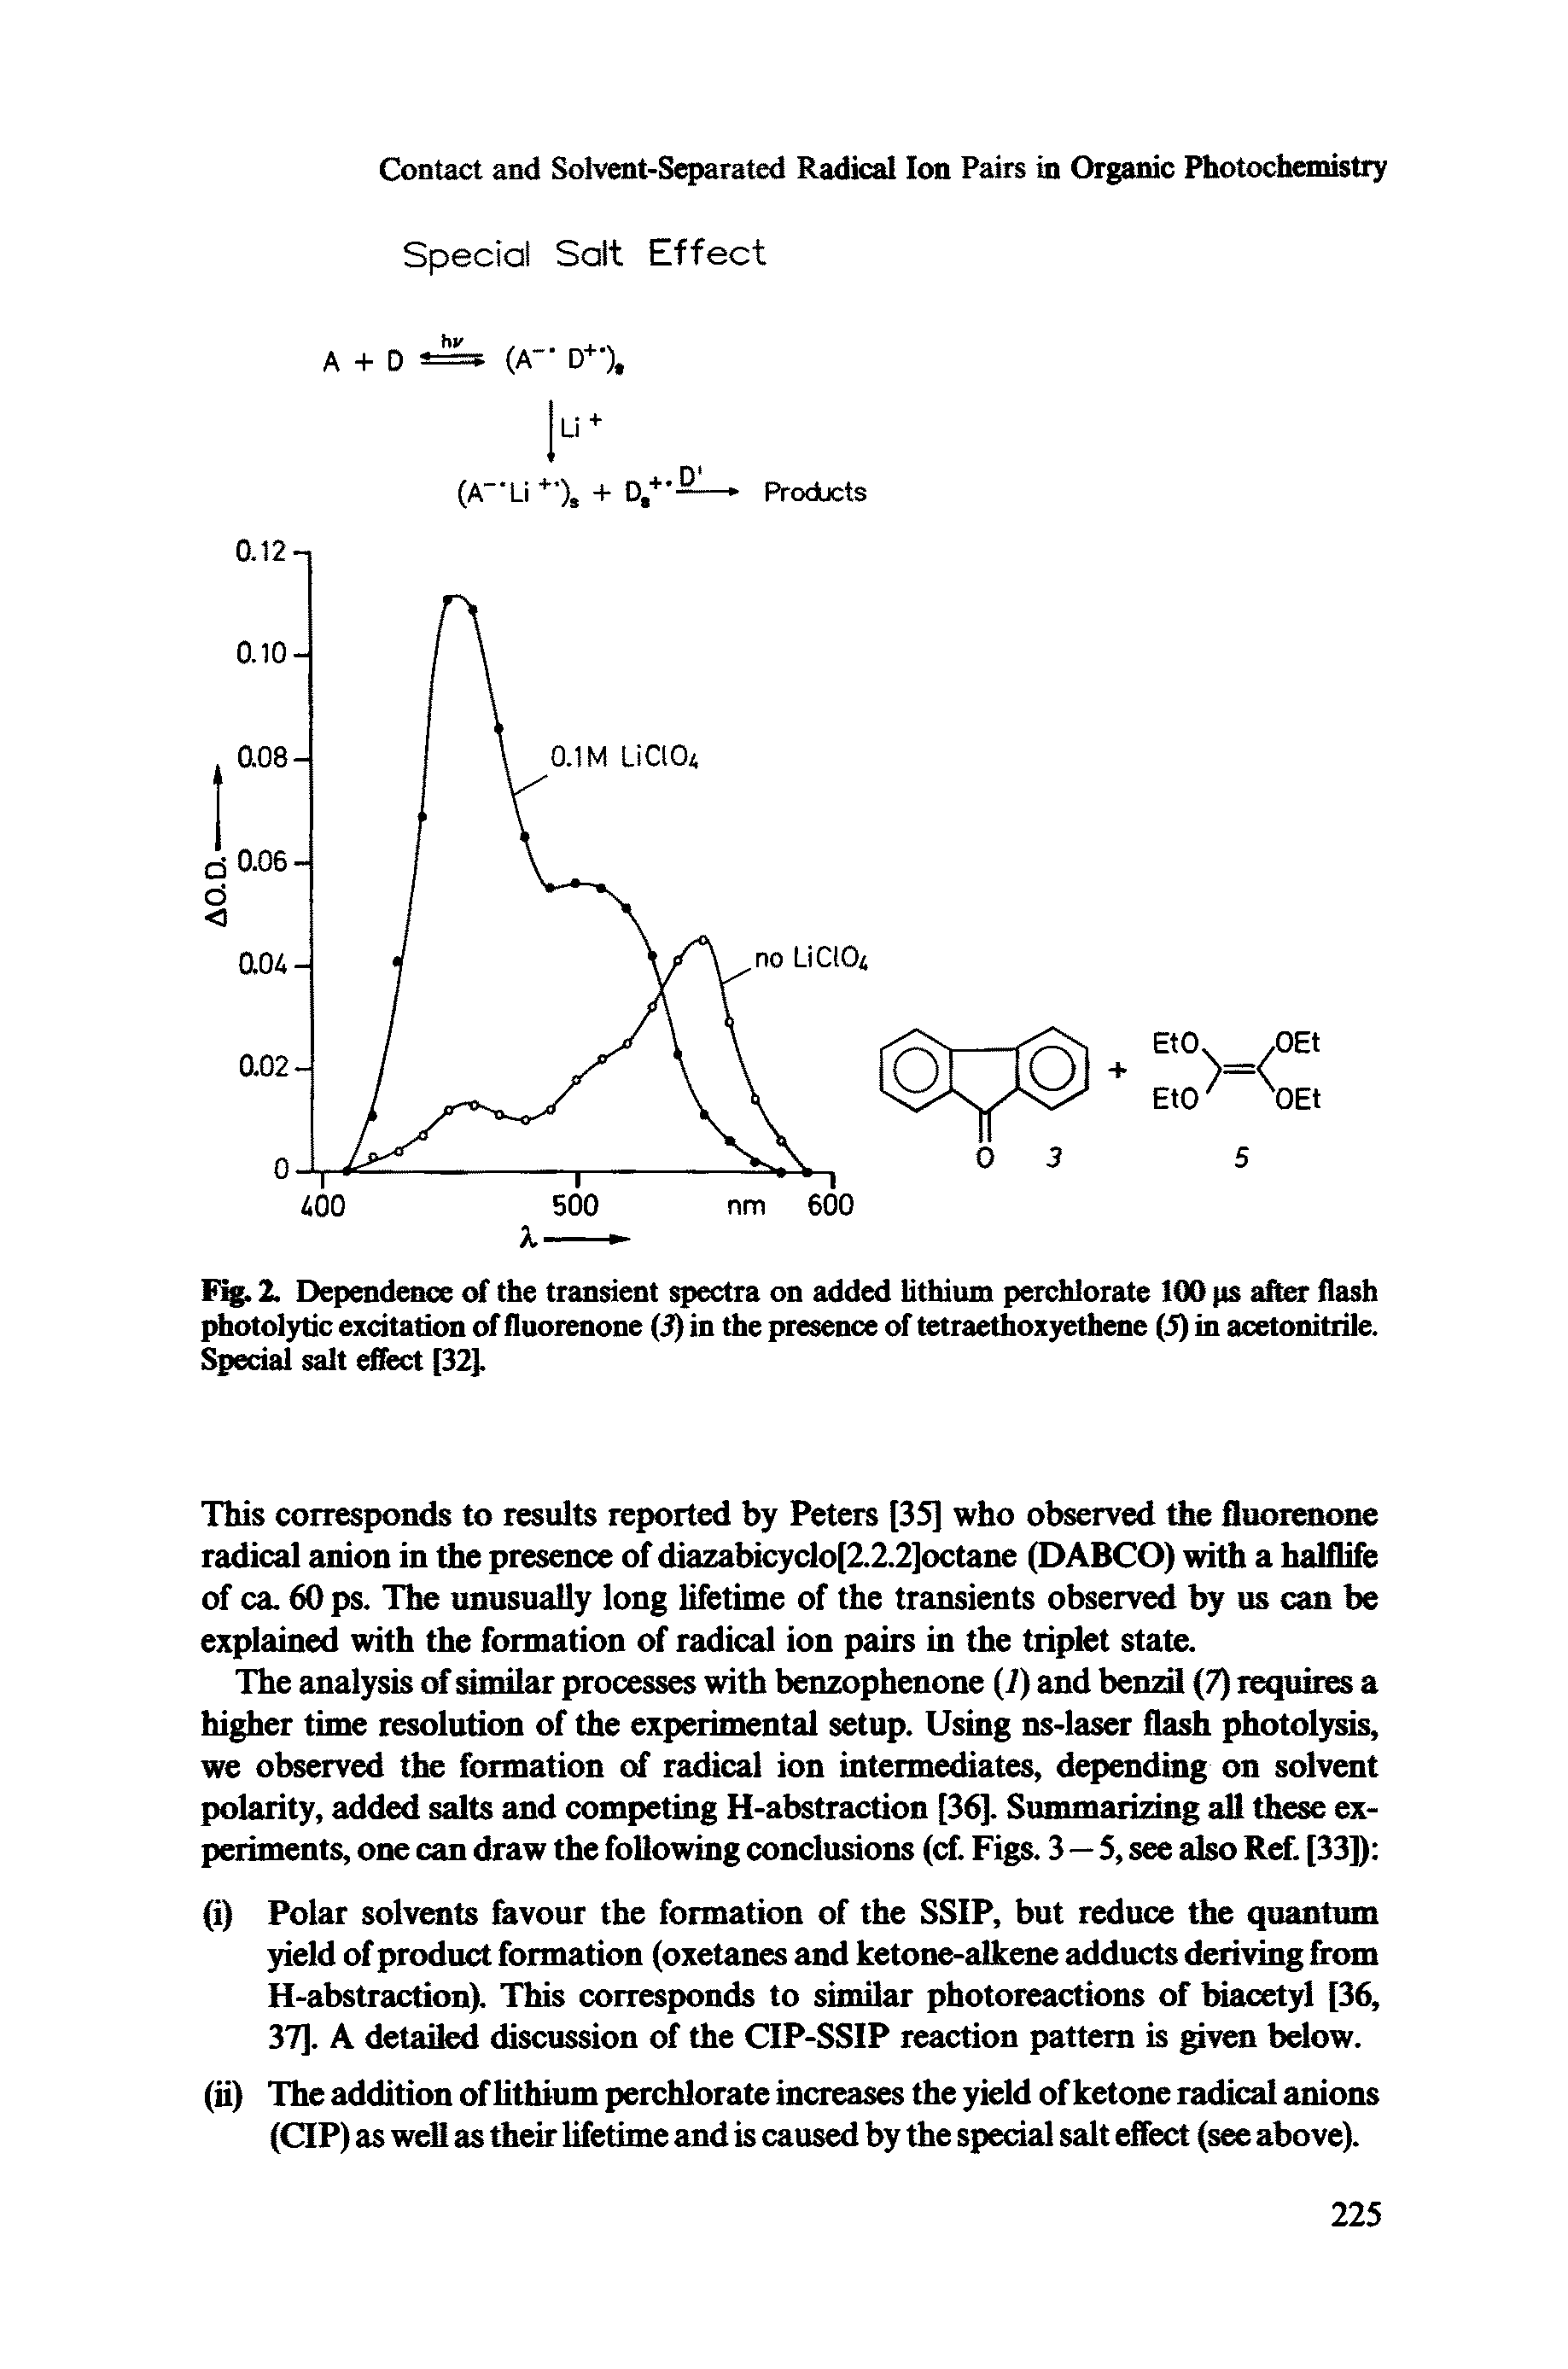 Fig. 2. Dependence of the transient spectra on added lithium perchlorate 100 ps after flash photolytic excitation of fluorenone (5) in the presence of tetraethoxyethene (5) in acetonitrile. Special salt effect [32].